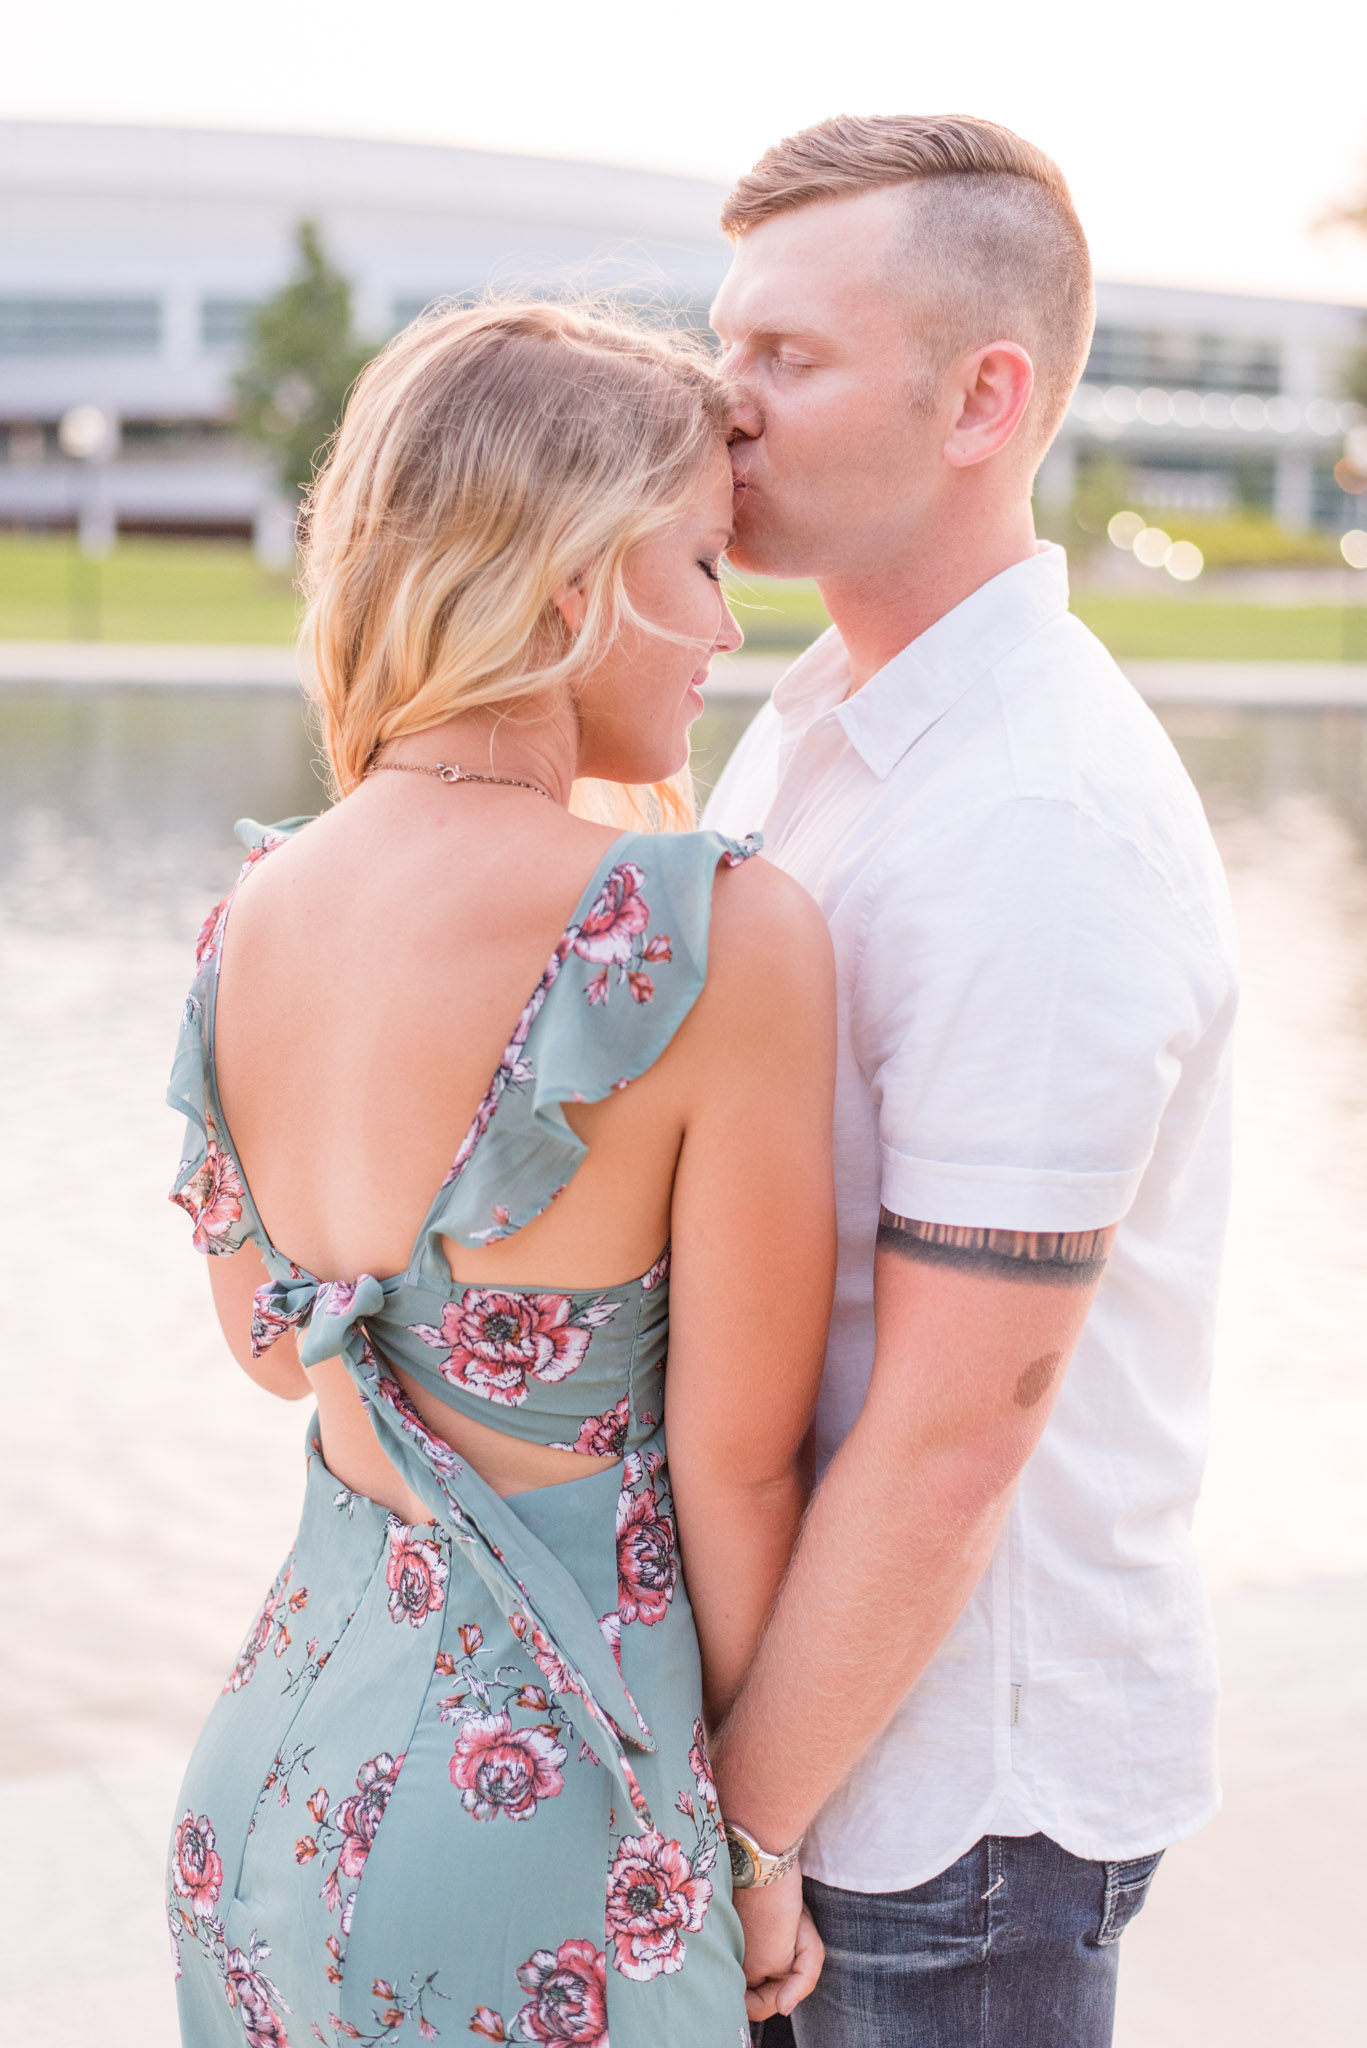 Groom kisses woman on forehead in front of lake. 